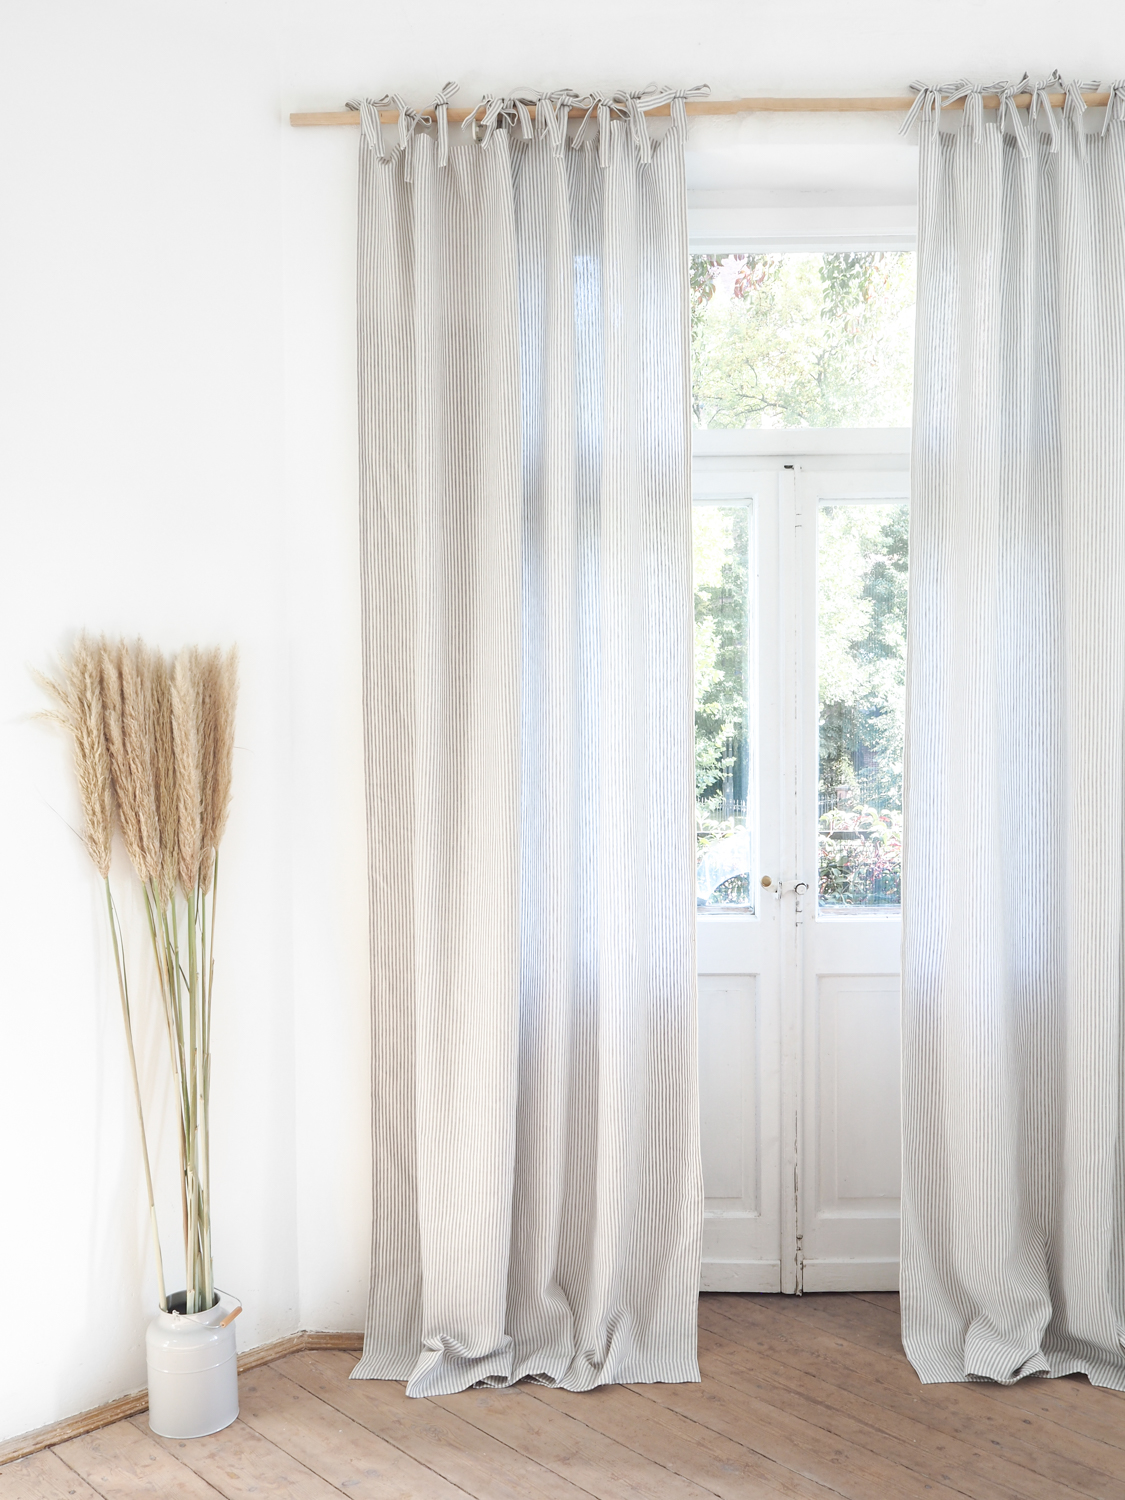 Striped tie top shading linen curtains